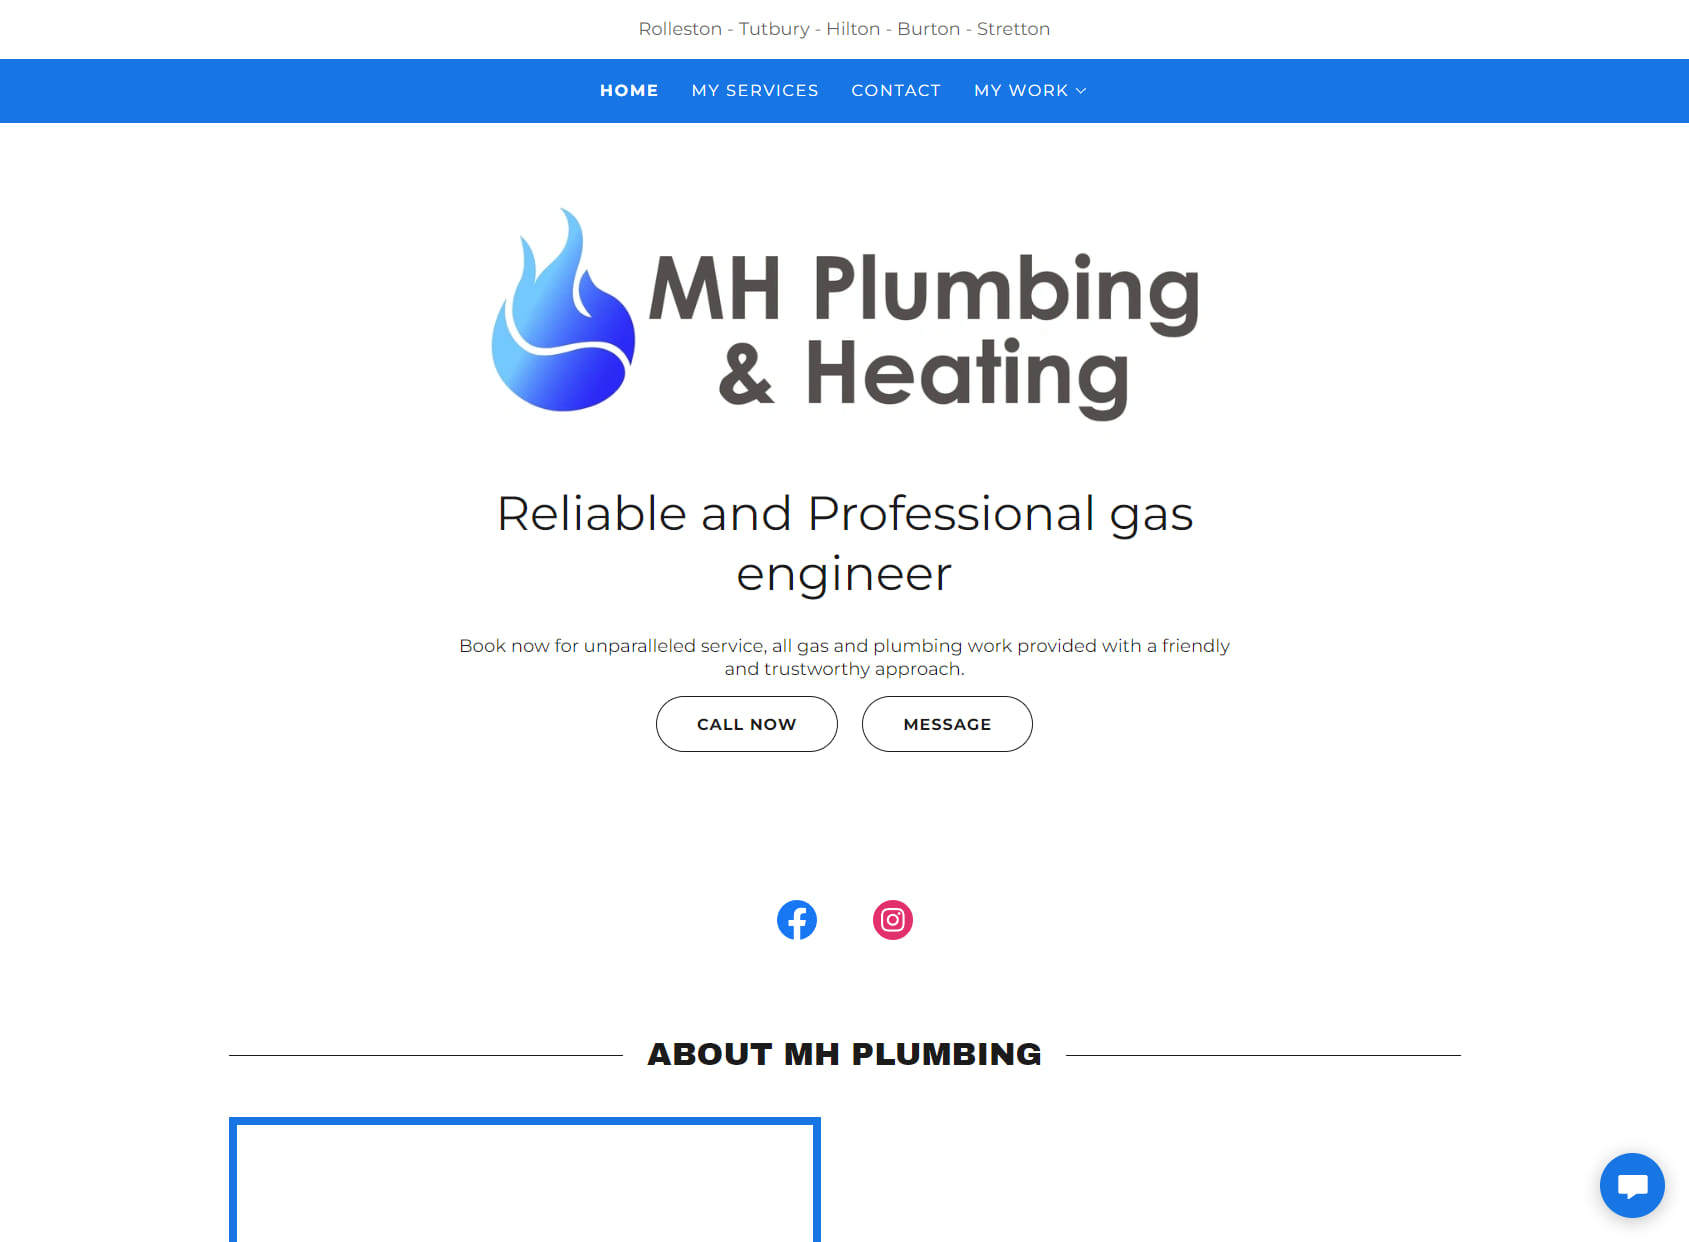 MH Plumbing and Heating